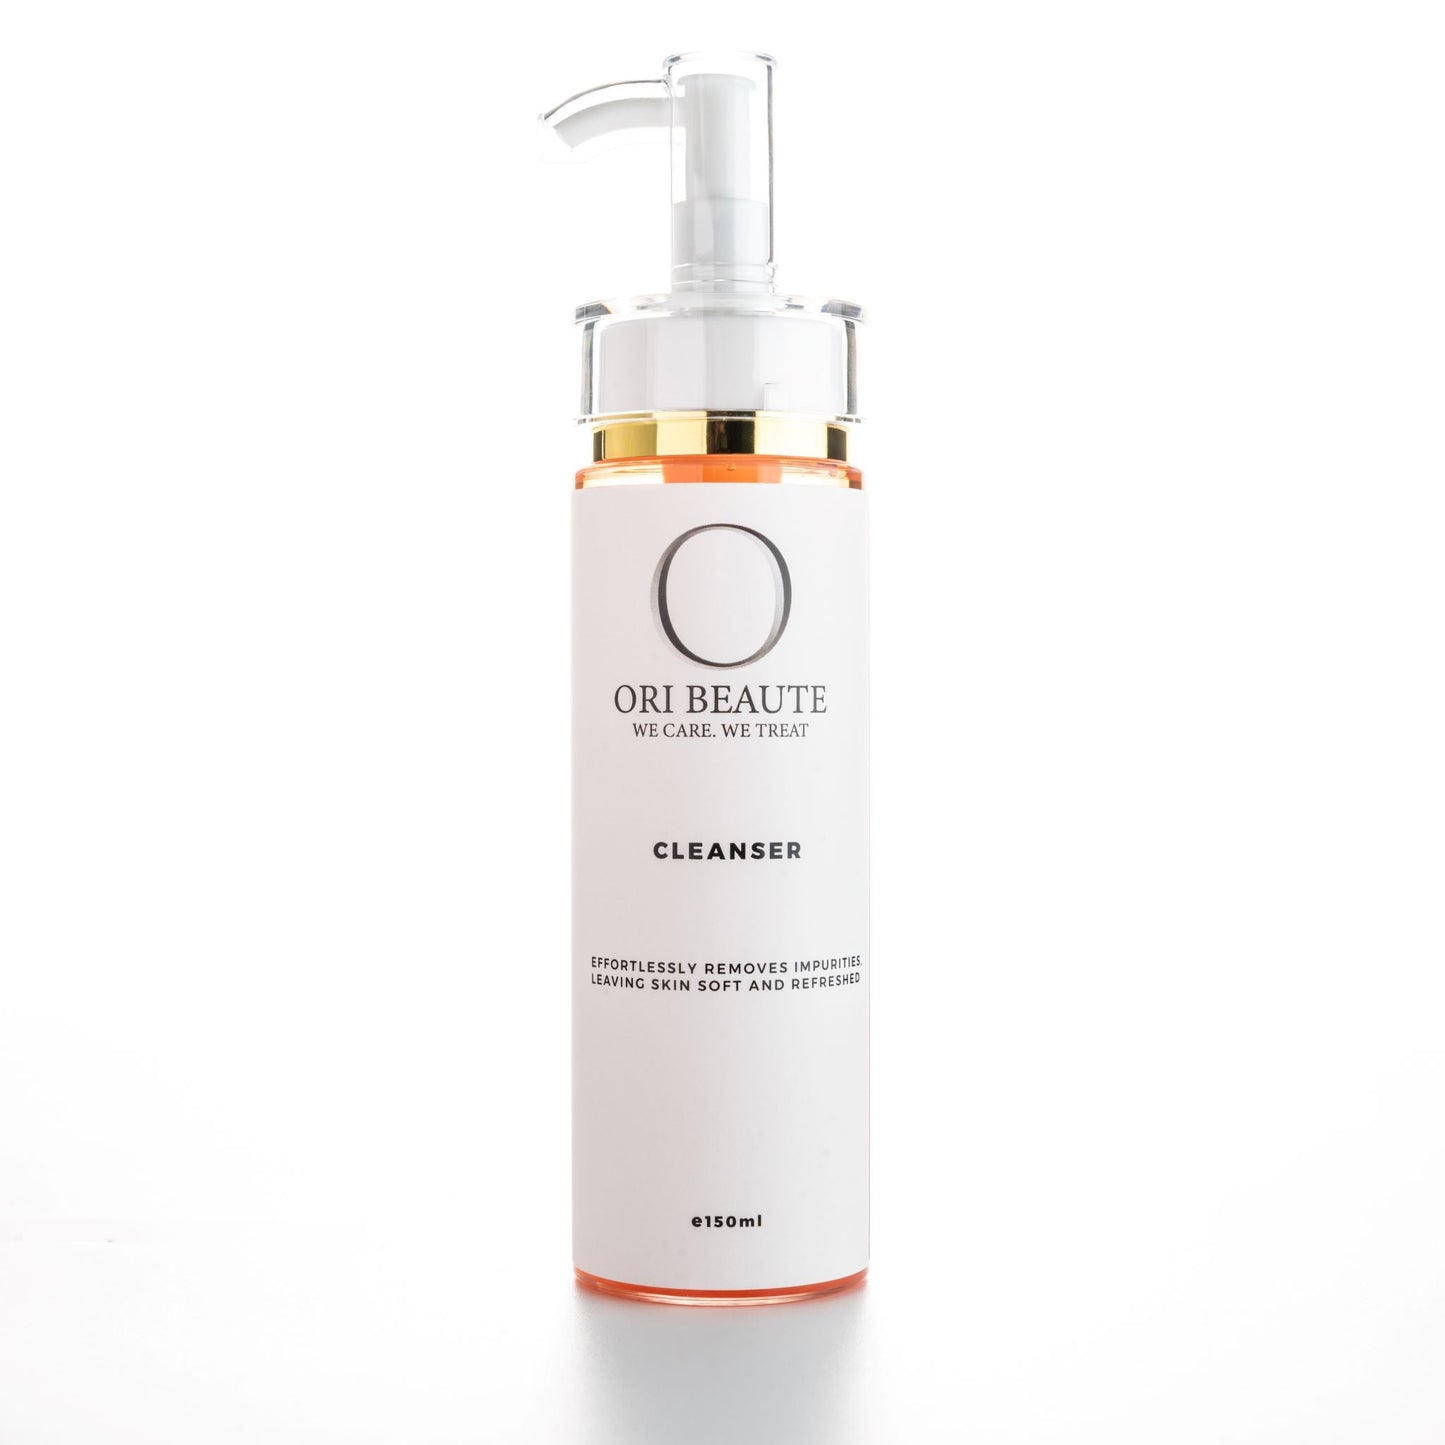 » cleanser 150ml (100% off)